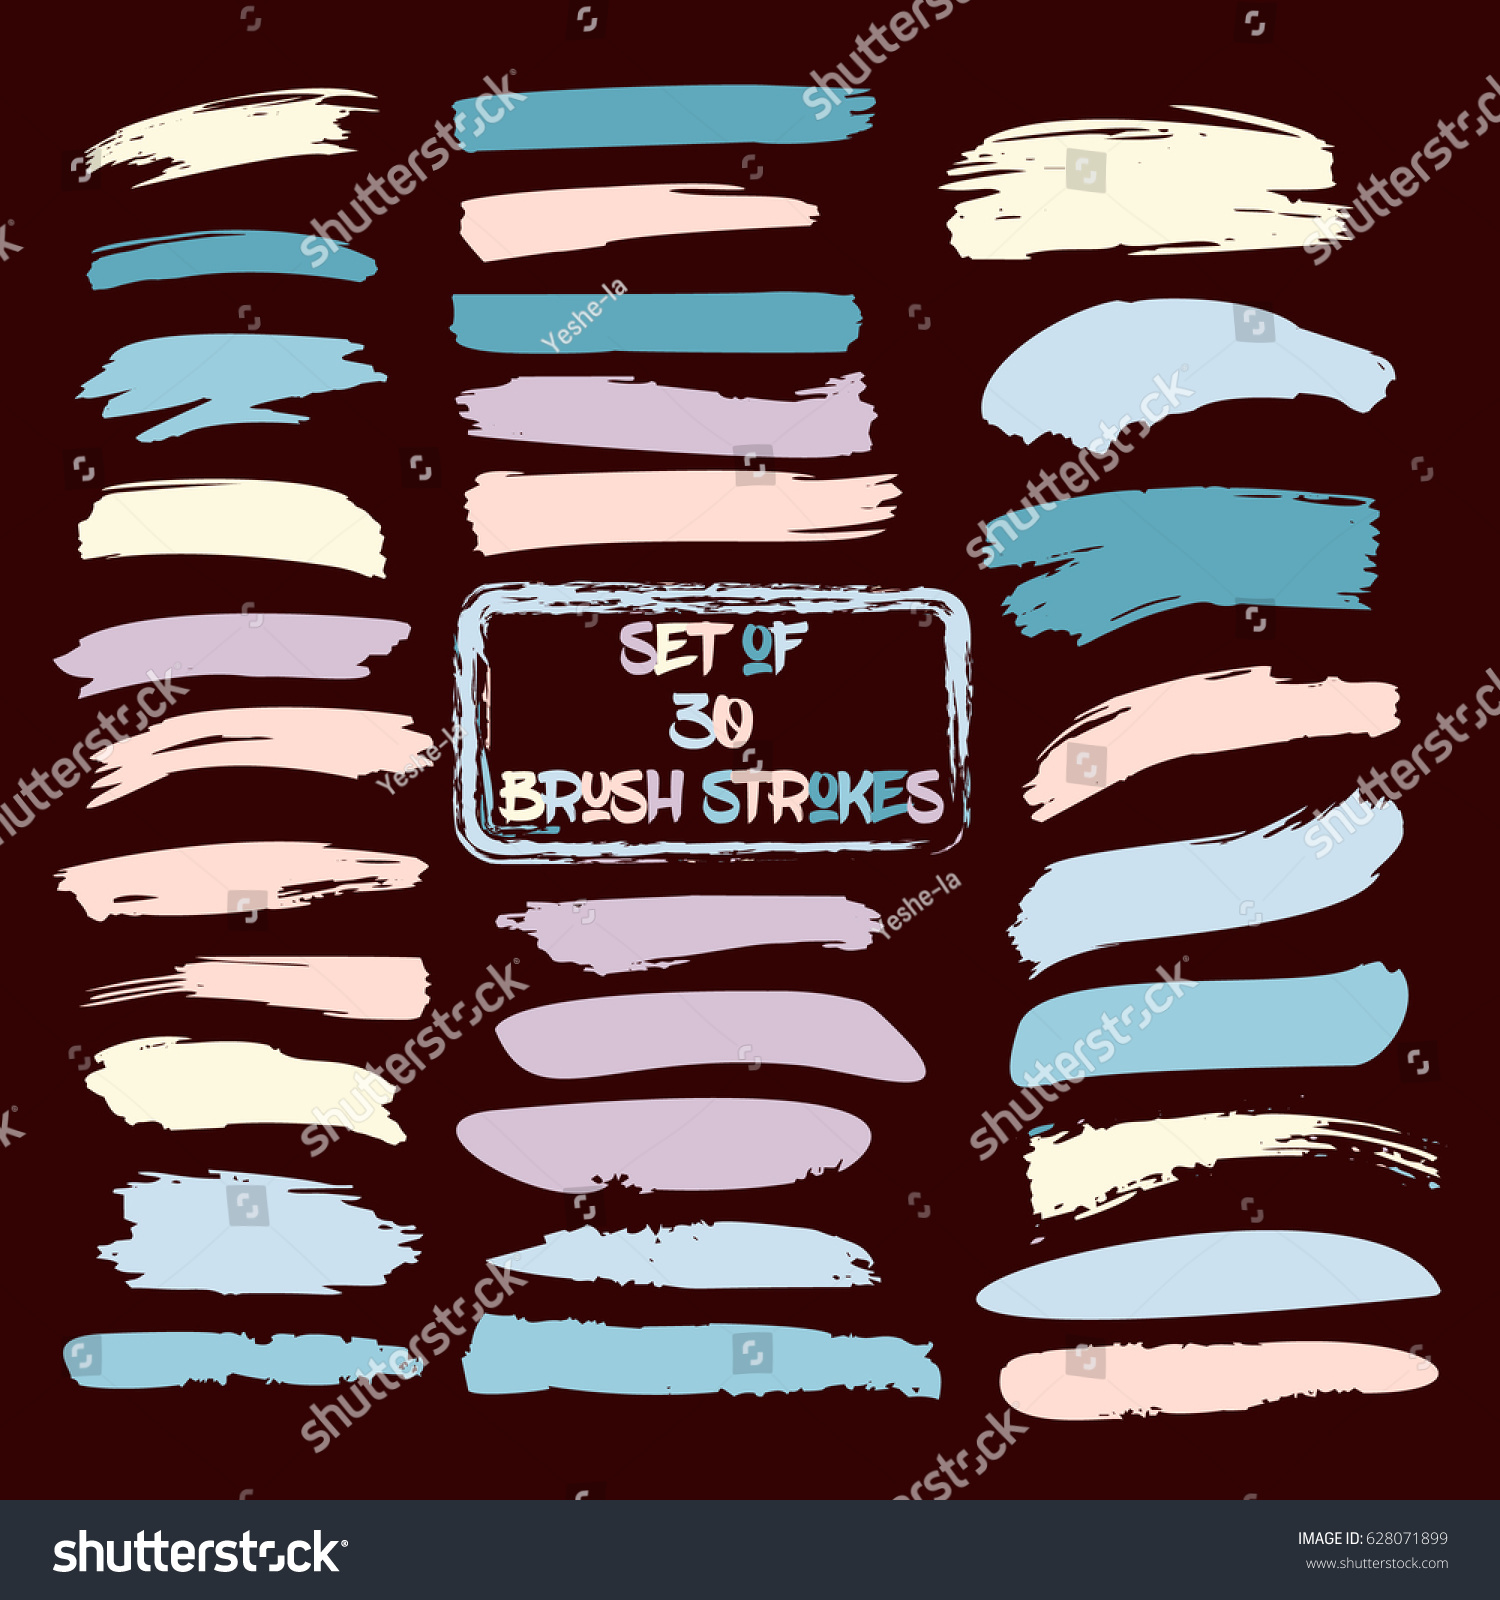 SVG of Set of thirty trendy blue and light purple vector brush strokes or backgrounds. Hand painted black ink brush strokes, brushes, and lines. Dirty grunge artistic design elements. Text backgrounds. svg